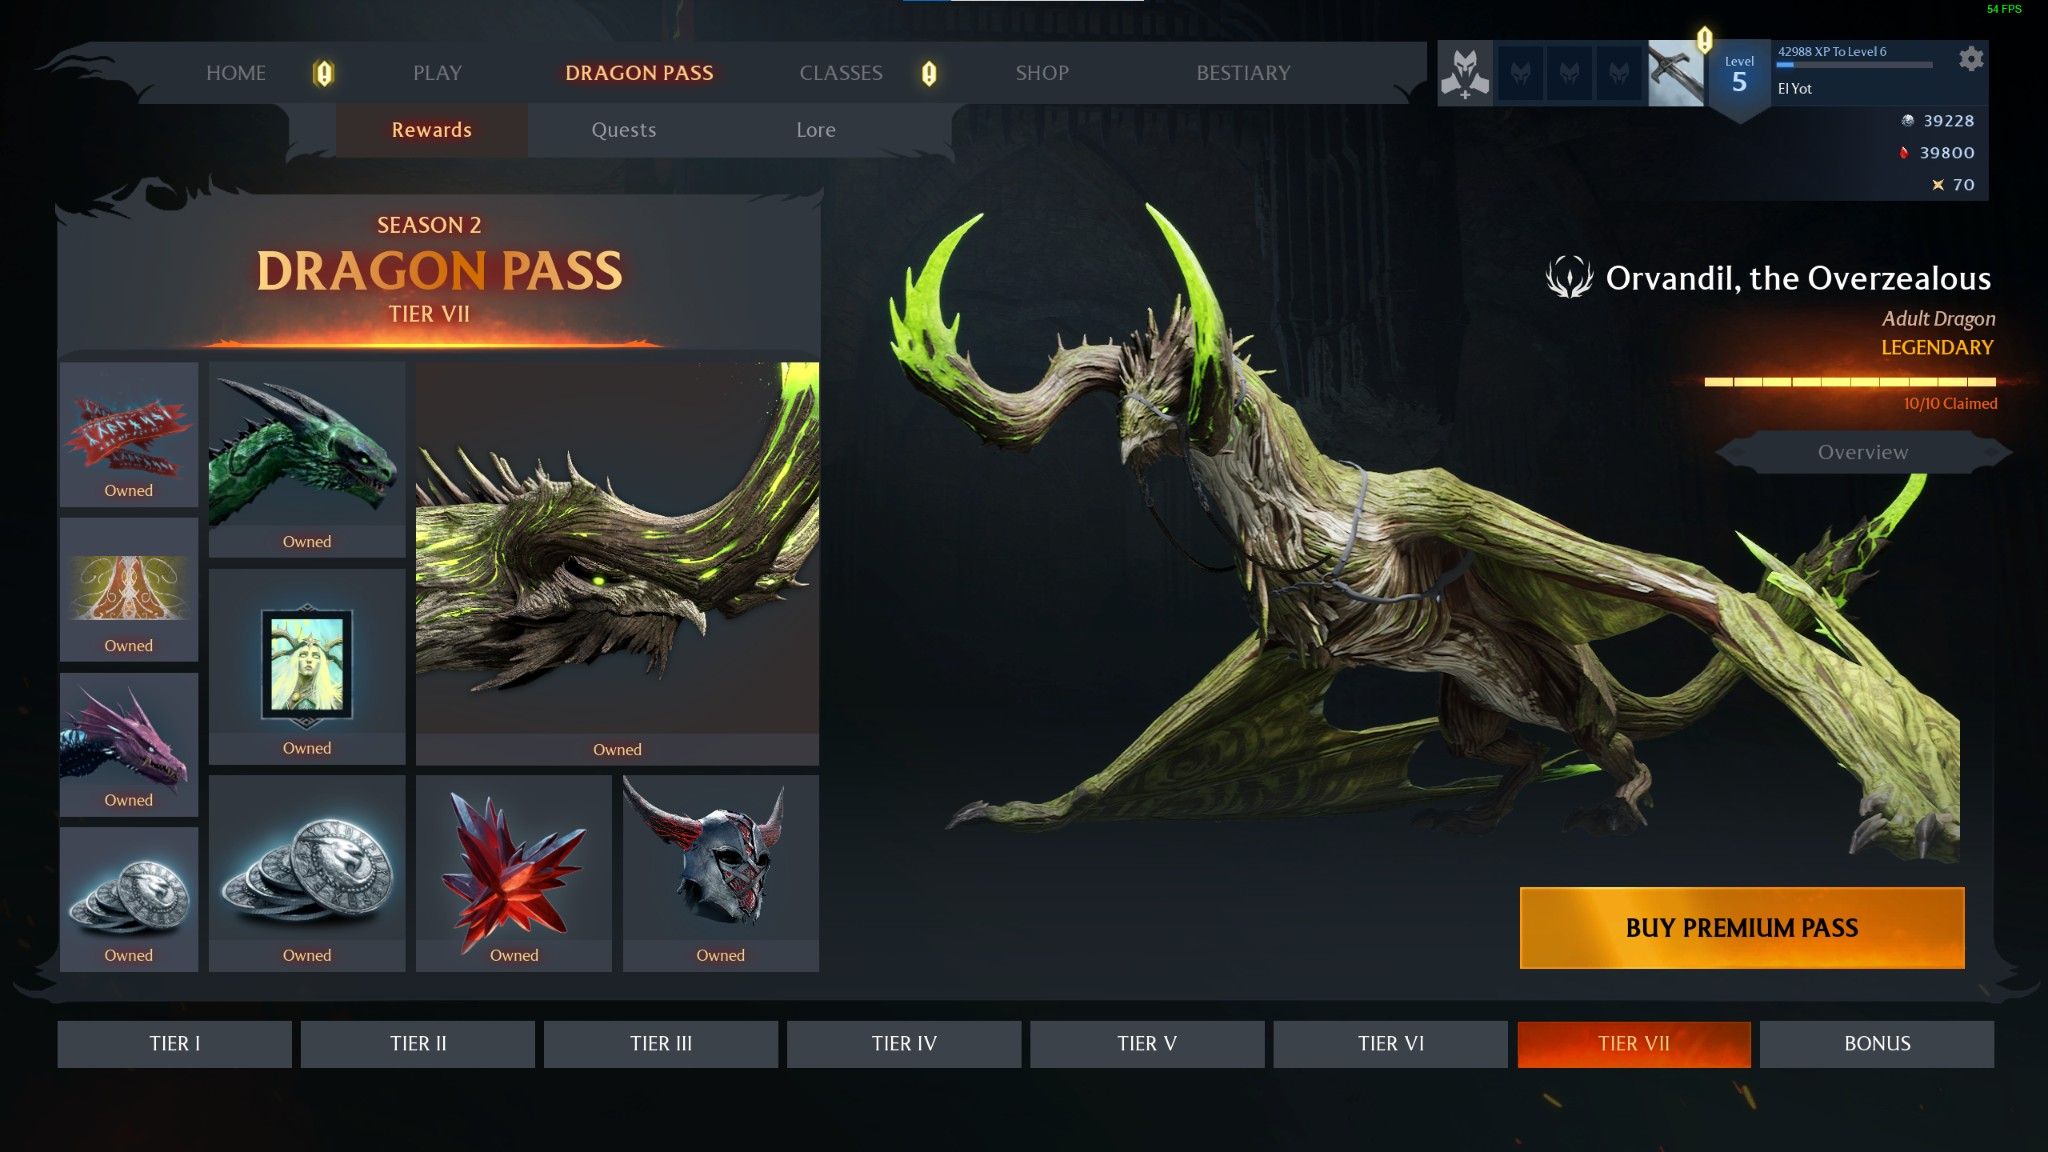 Century: Age of Ashes Dragon Pass screen showing level 7 and a green dragon.